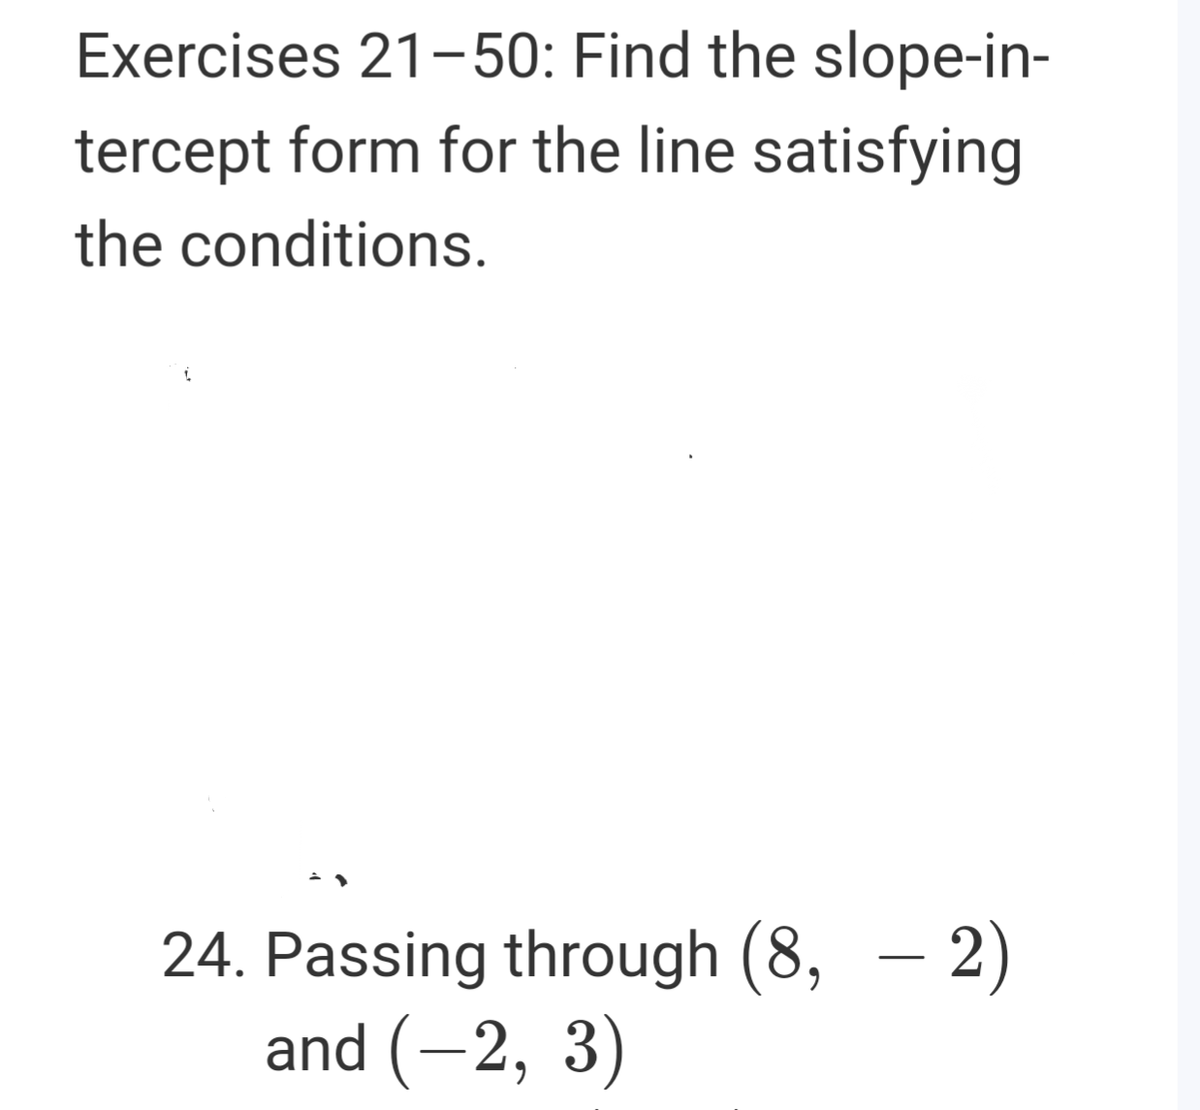 Exercises 21-50: Find the slope-in-
tercept form for the line satisfying
the conditions.
24. Passing through (8, – 2)
and (-2, 3)
